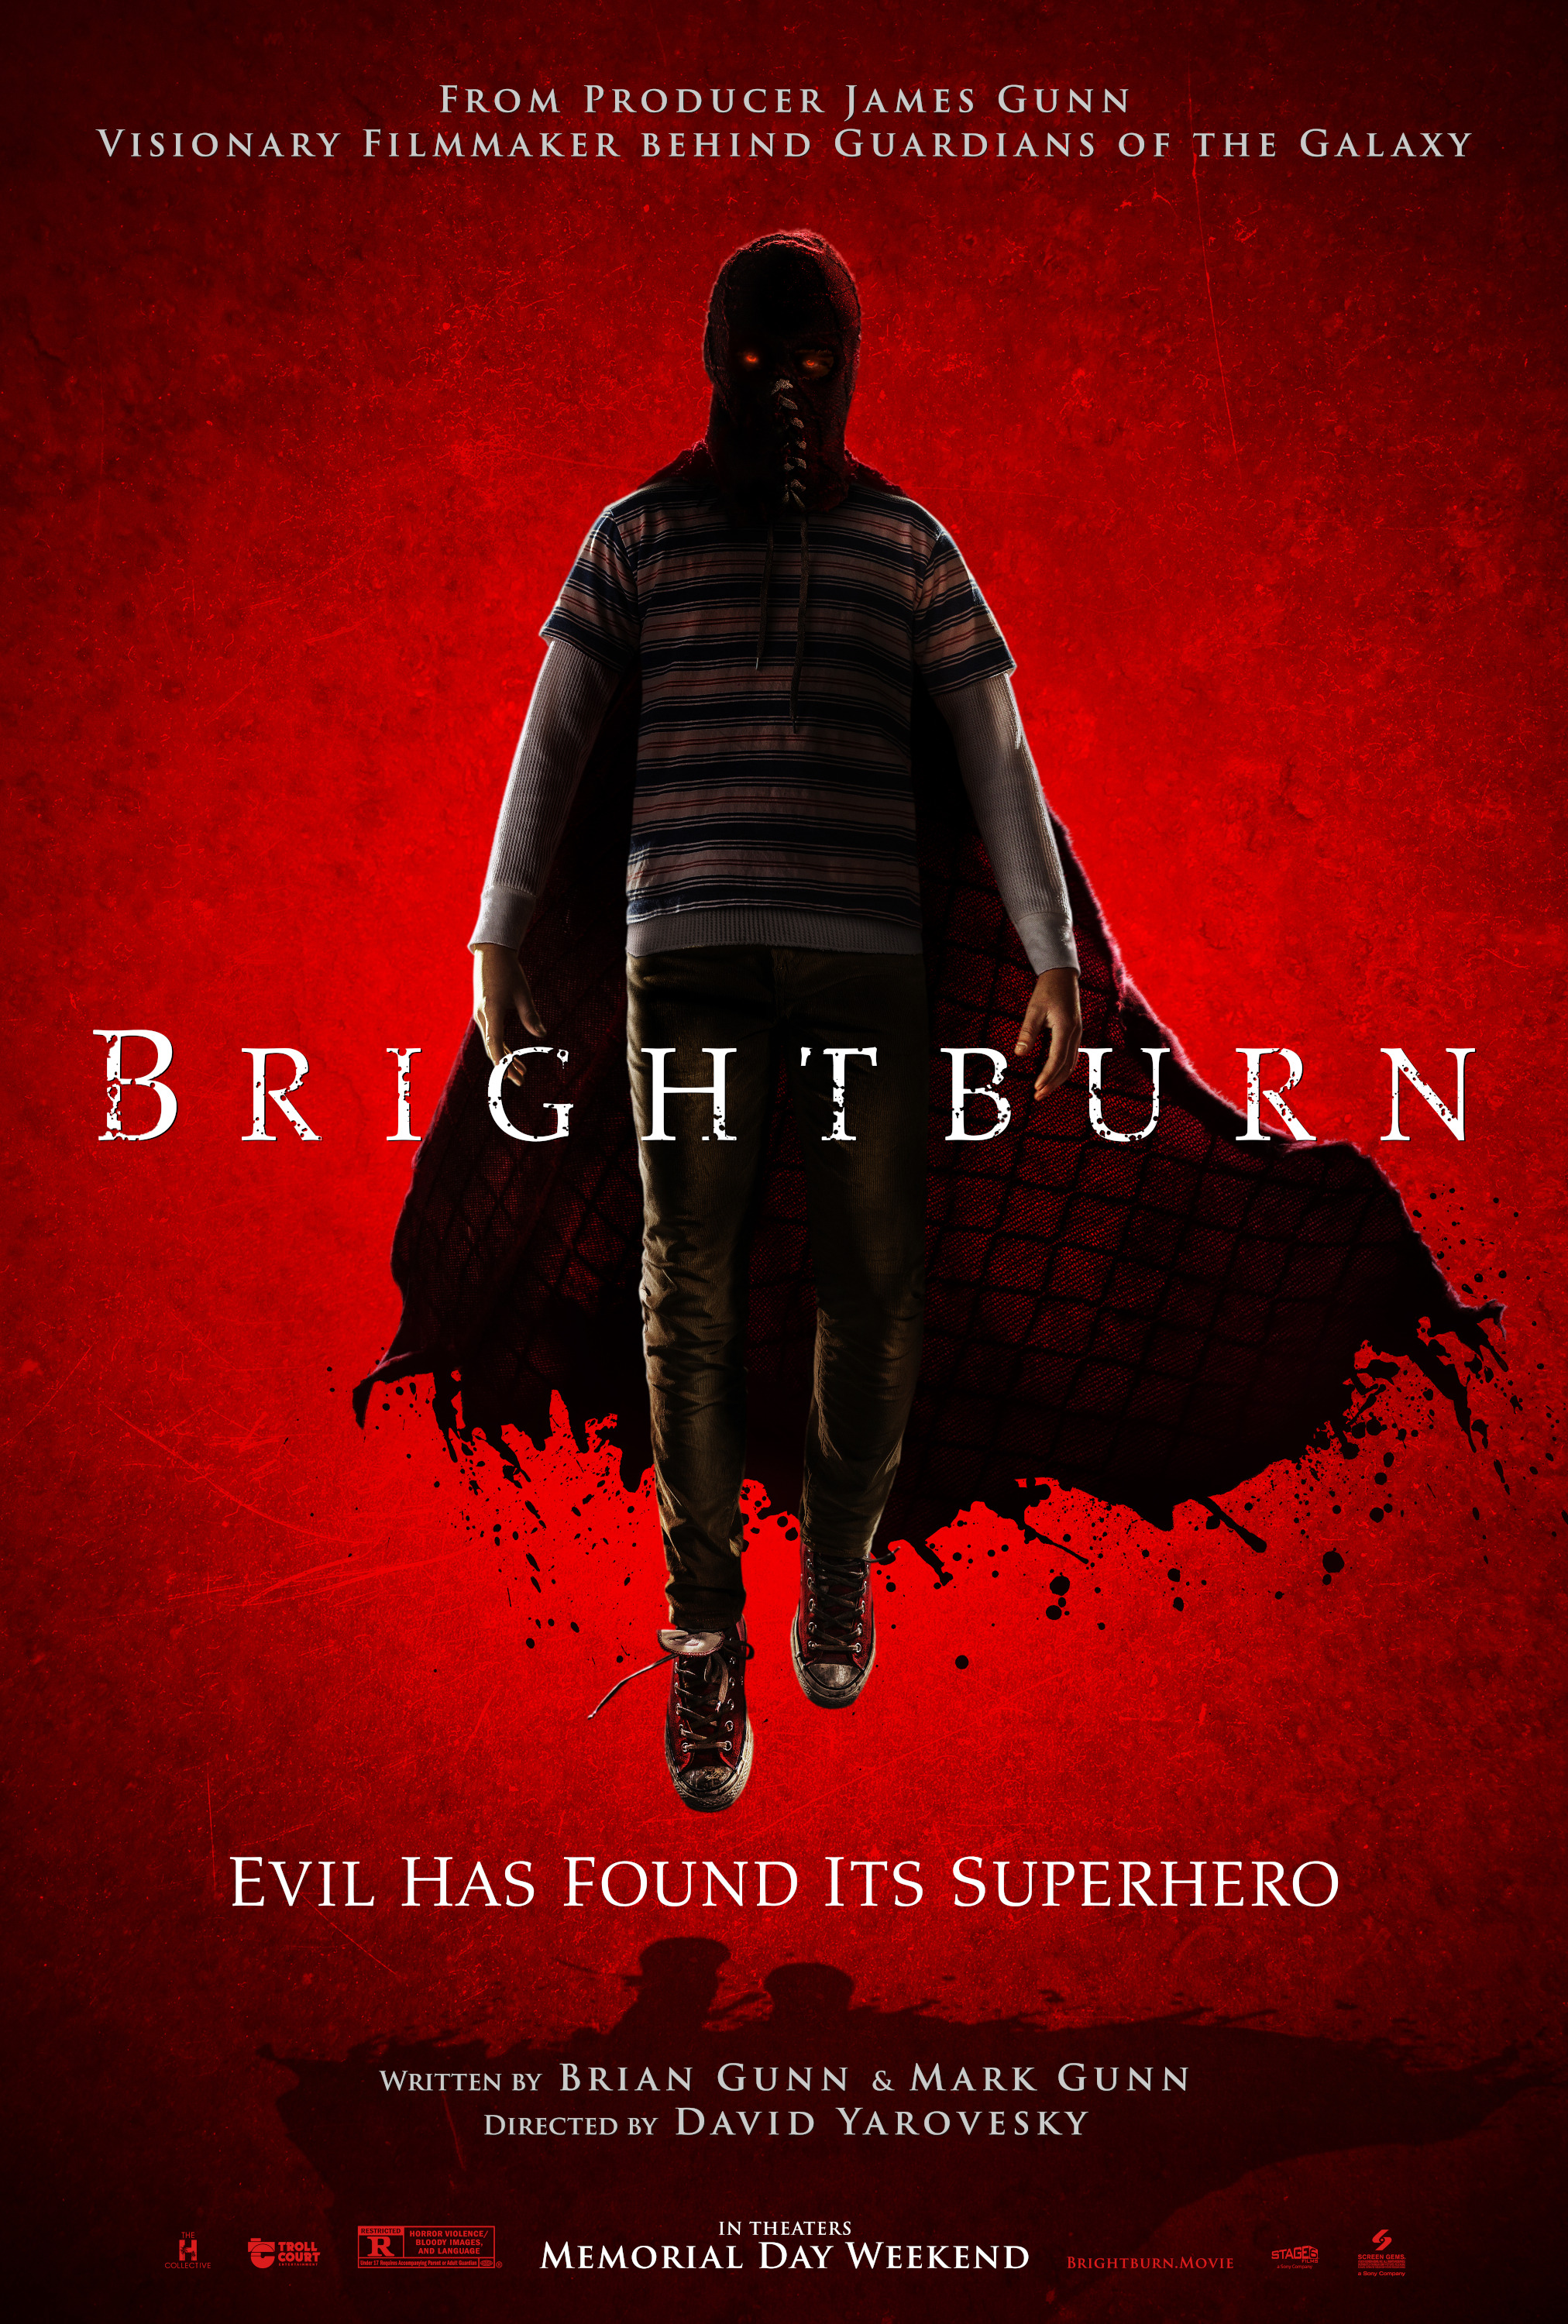 Brightburn film review: Taking Man Of Steel’s pessimism to the next level